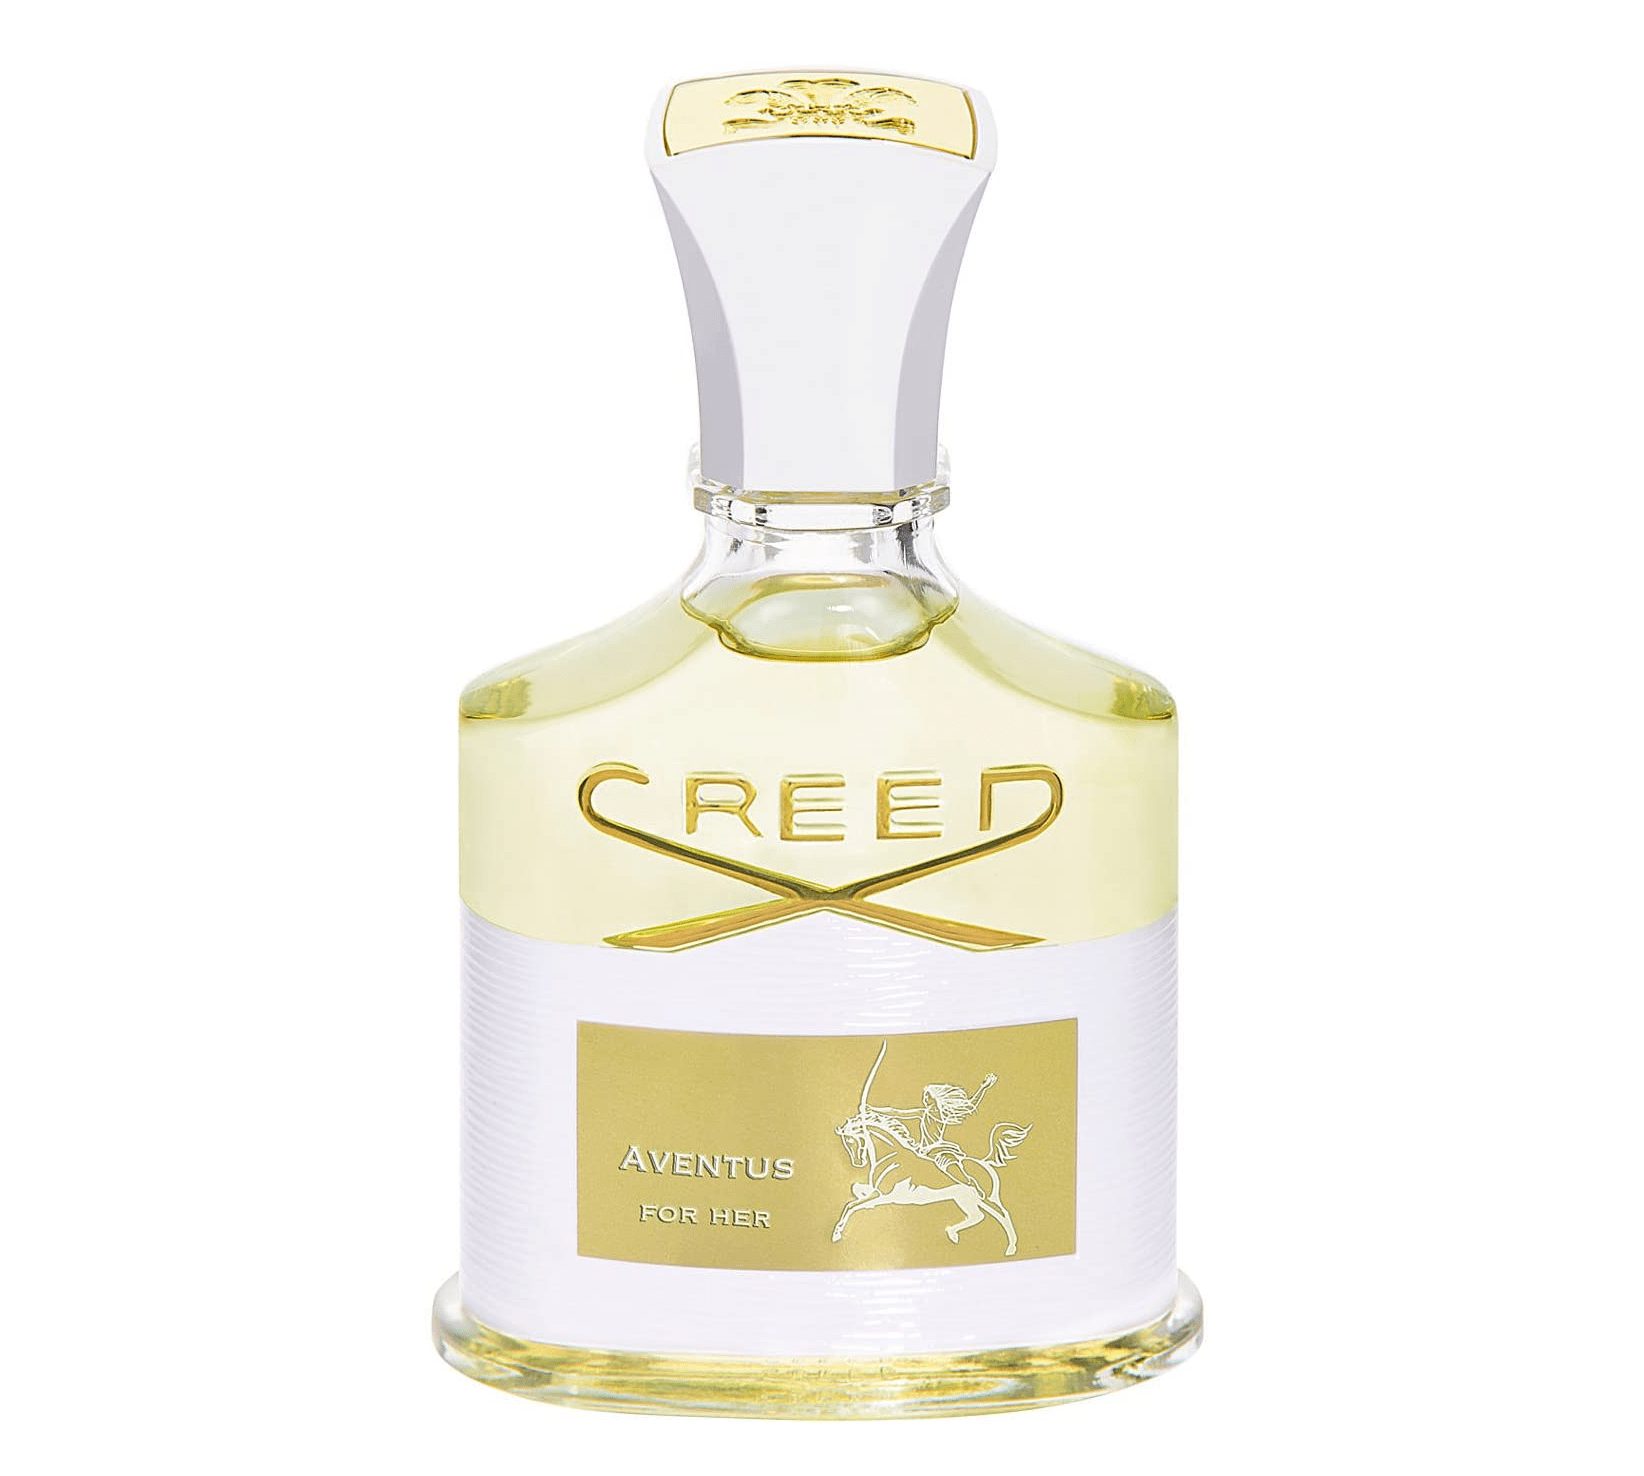 Creed - Aventus for her, (クリード - アバントゥス フォーハー)